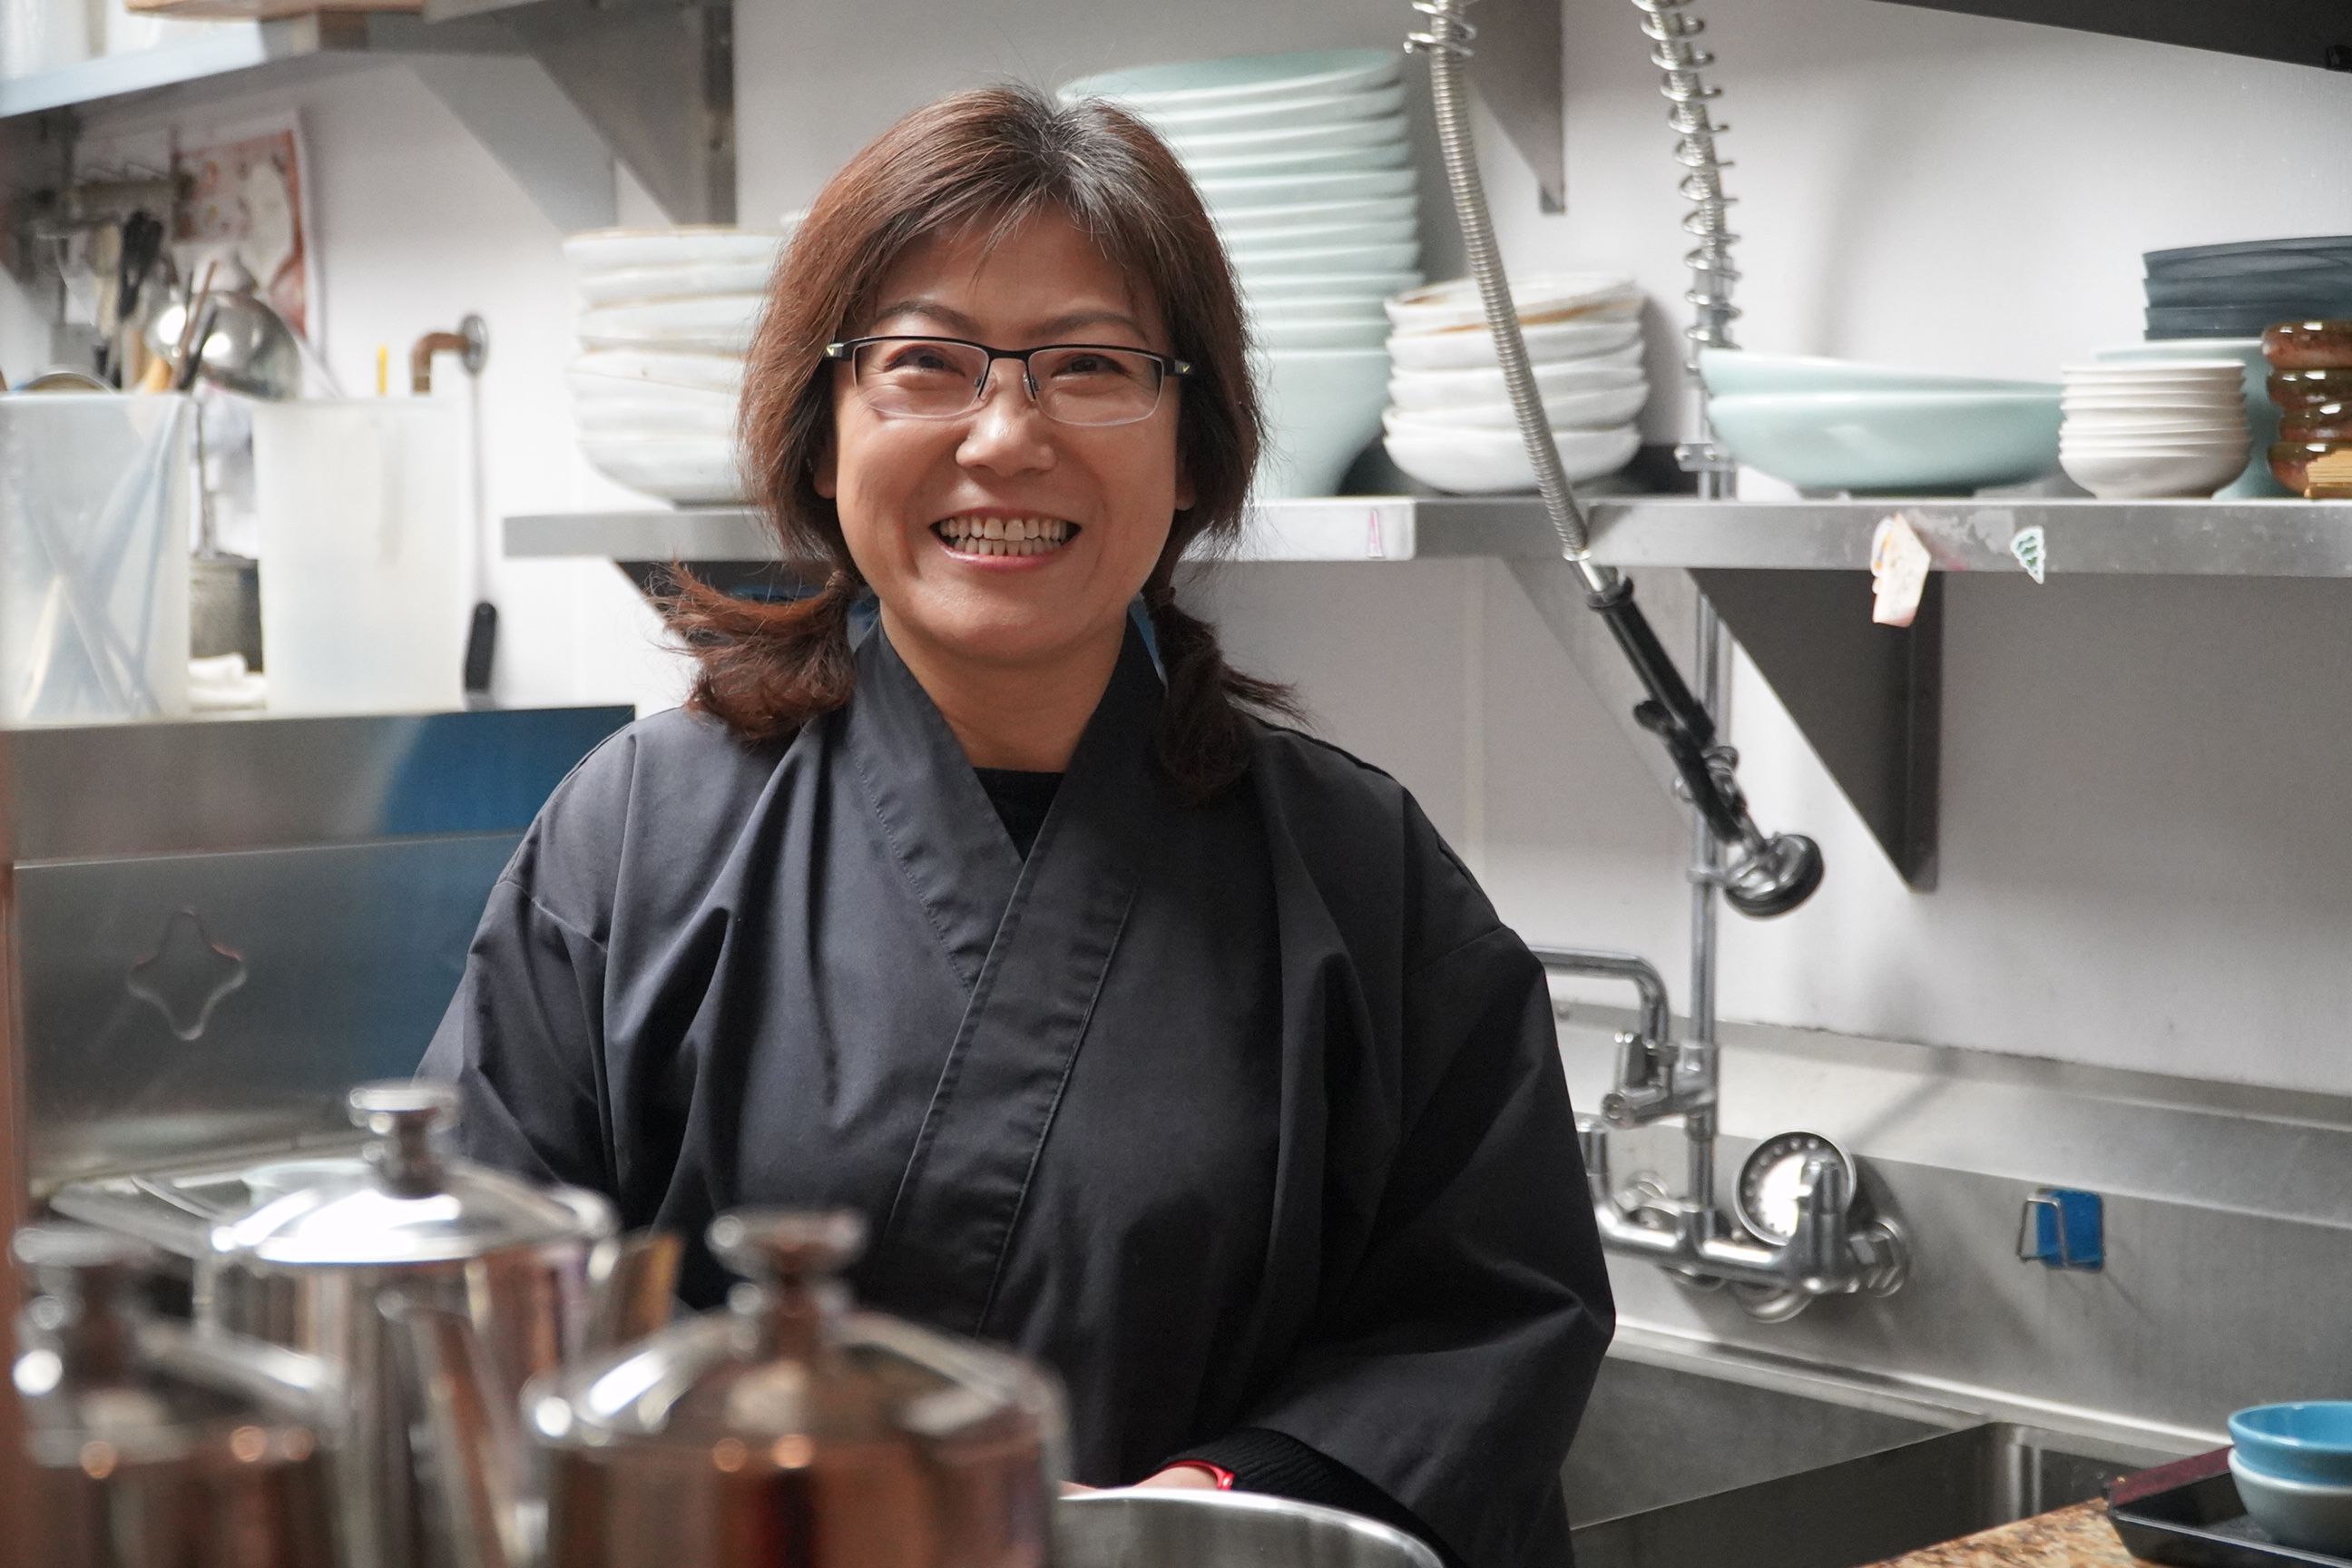 Li Ma is standing in the kitchen of her Japanese restaurant, smiling at the camera.